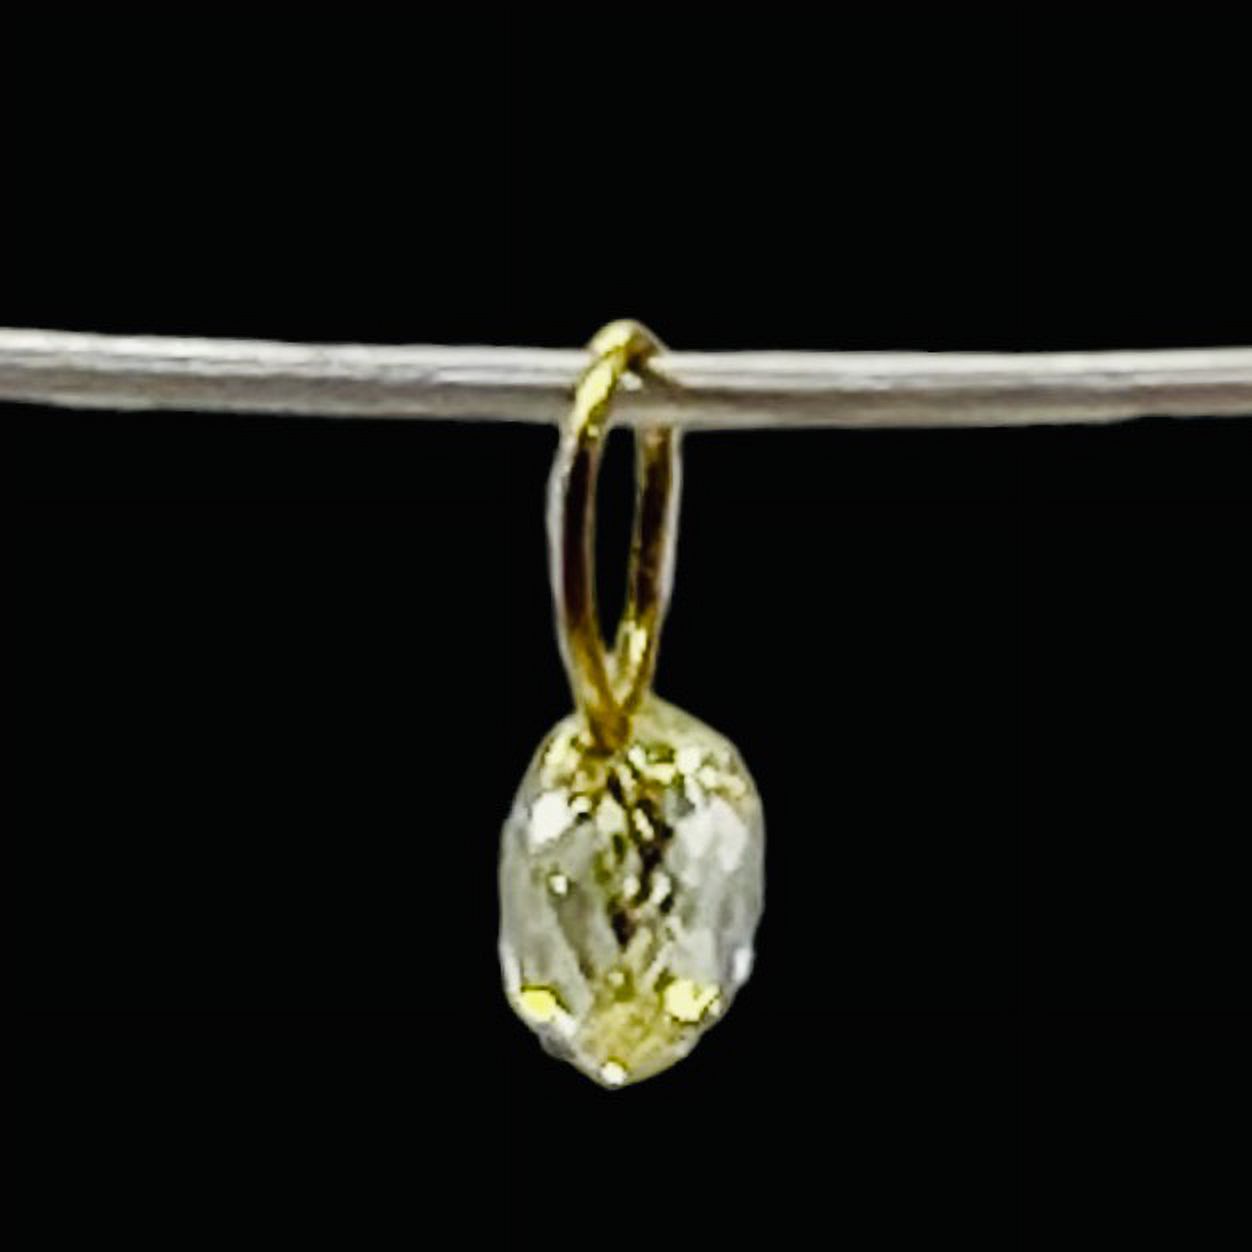 0.21cts Natural Canary 3x2.5x2mm Diamond 18K Gold Pendant 8798P - image 3 of 12